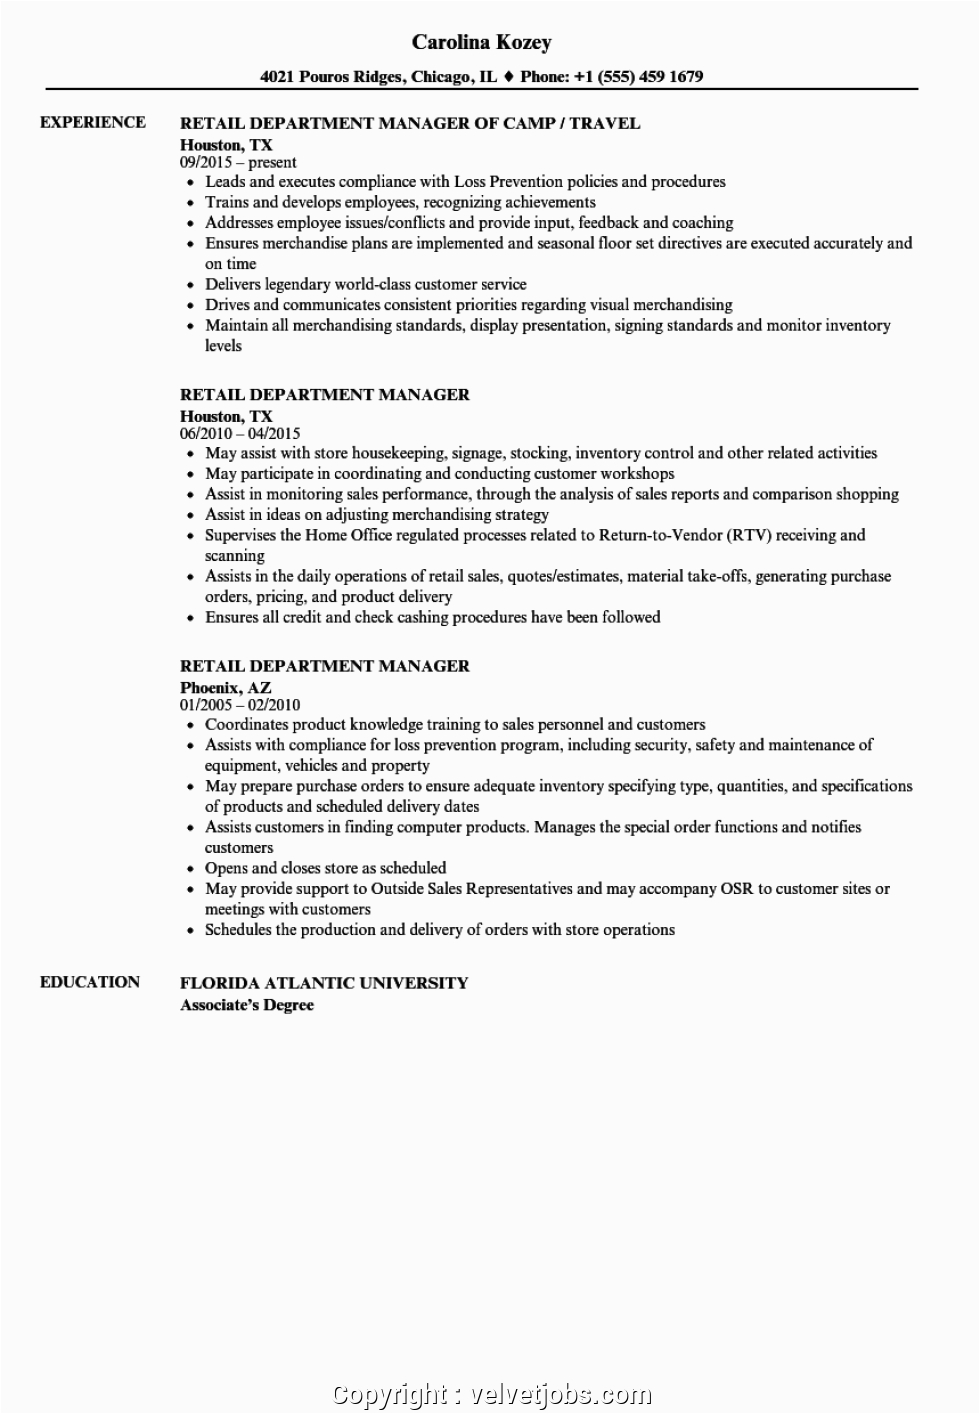 Sample Resume for Sm Department Store Executive Retail Department Manager Resume Retail